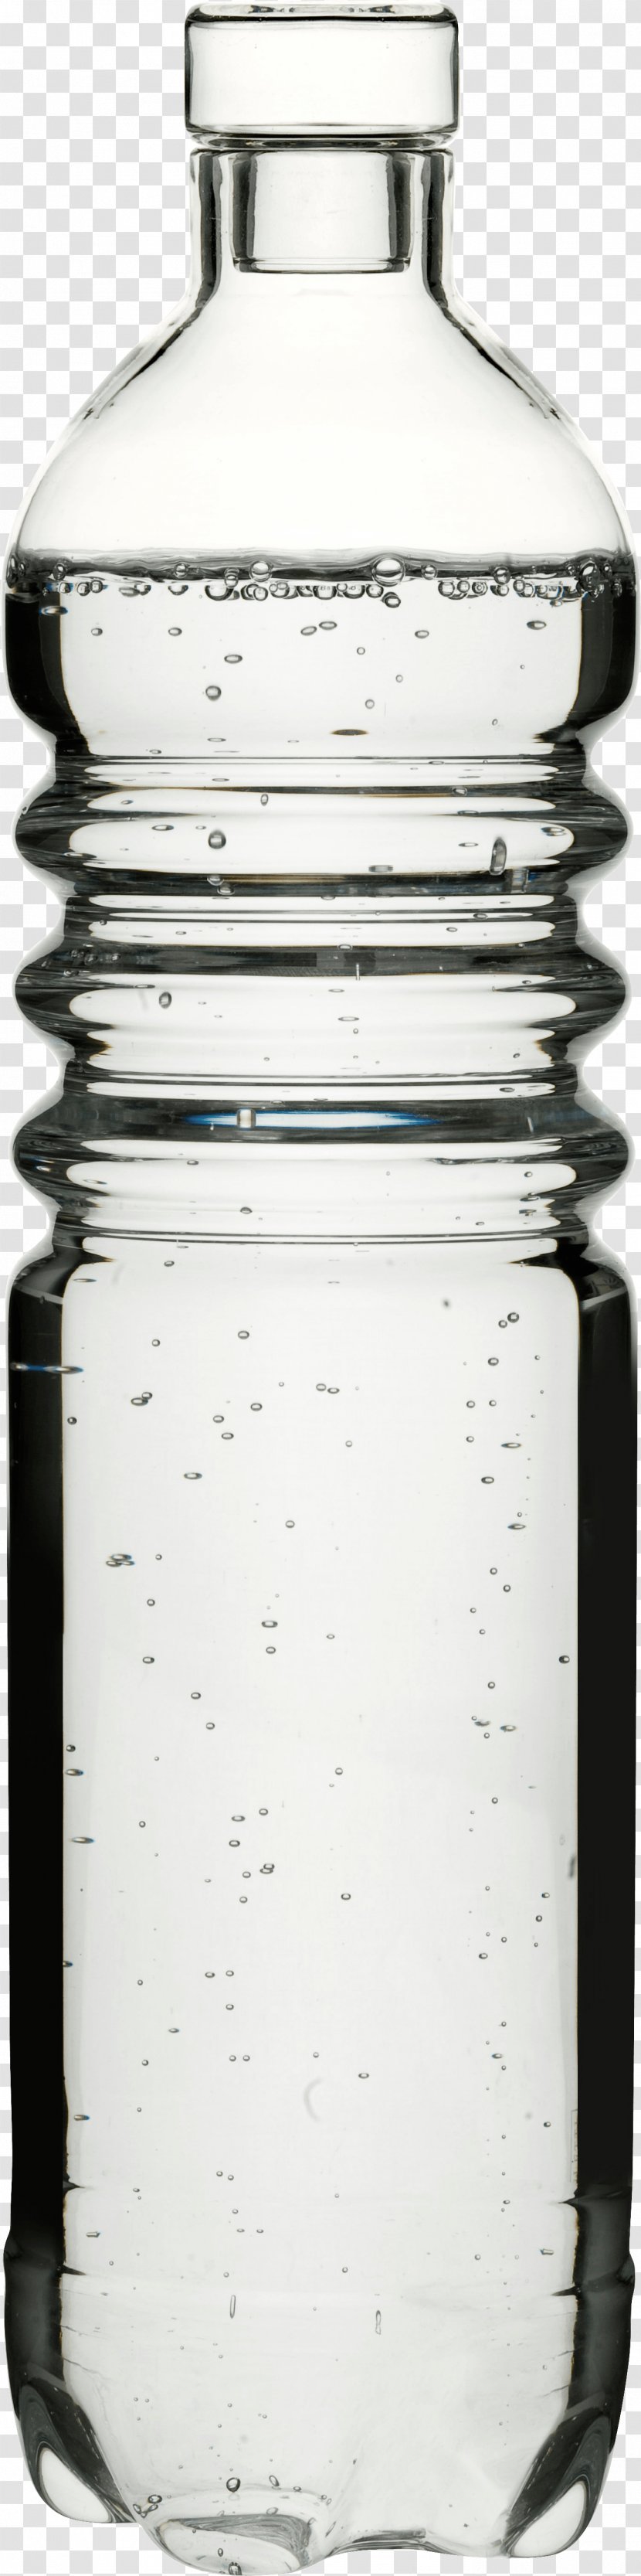 Bung Glass Bottle Water - Plastic Image Transparent PNG